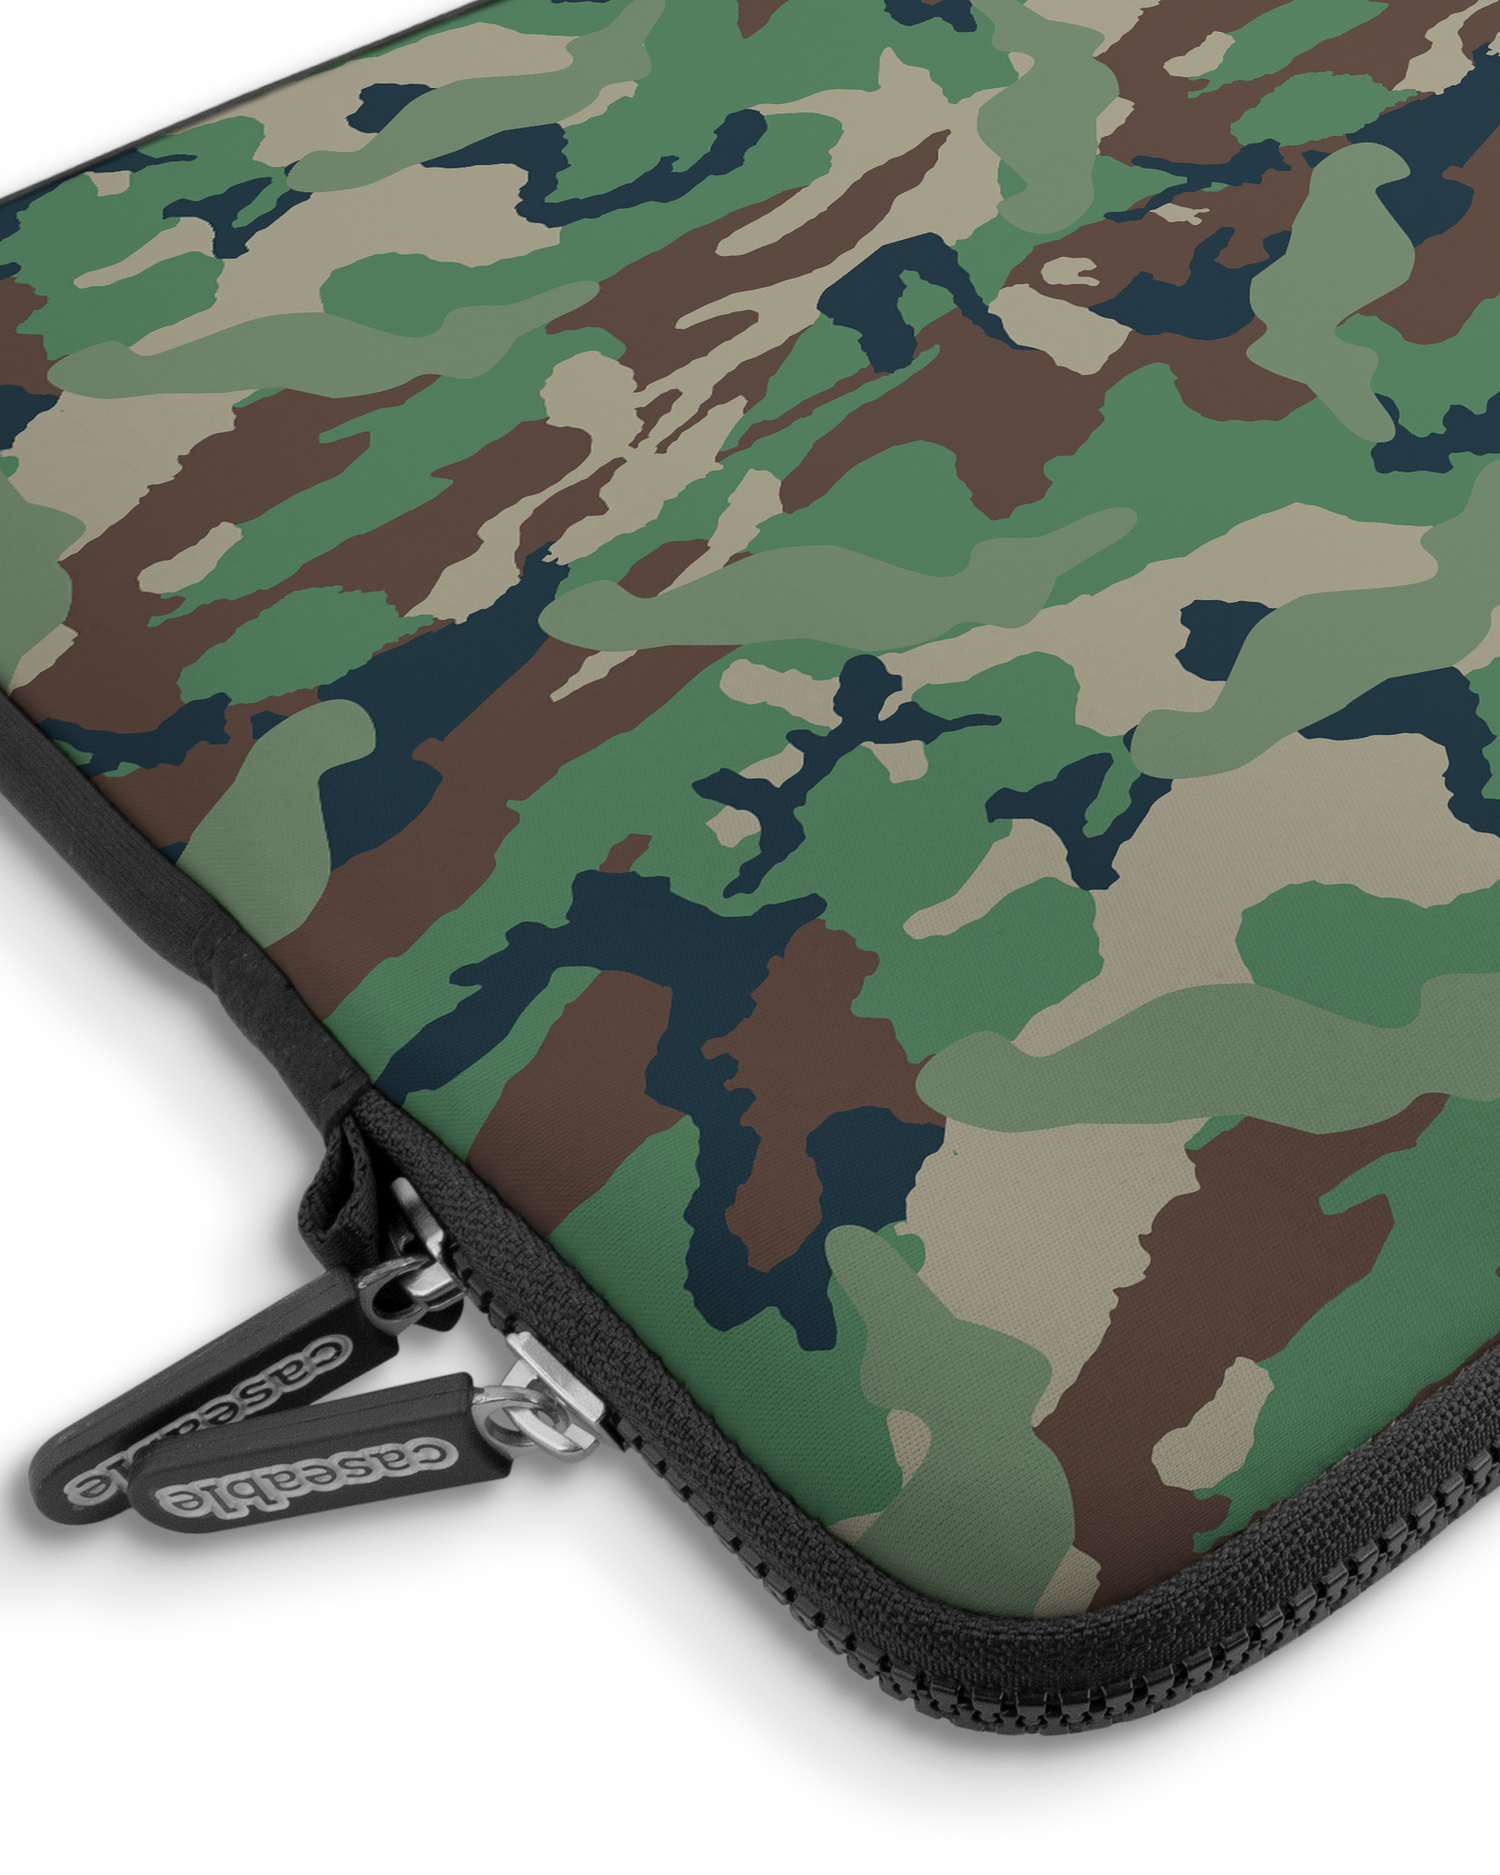 Green and Brown Camo Premium Laptop Bag 15 inch with device inside